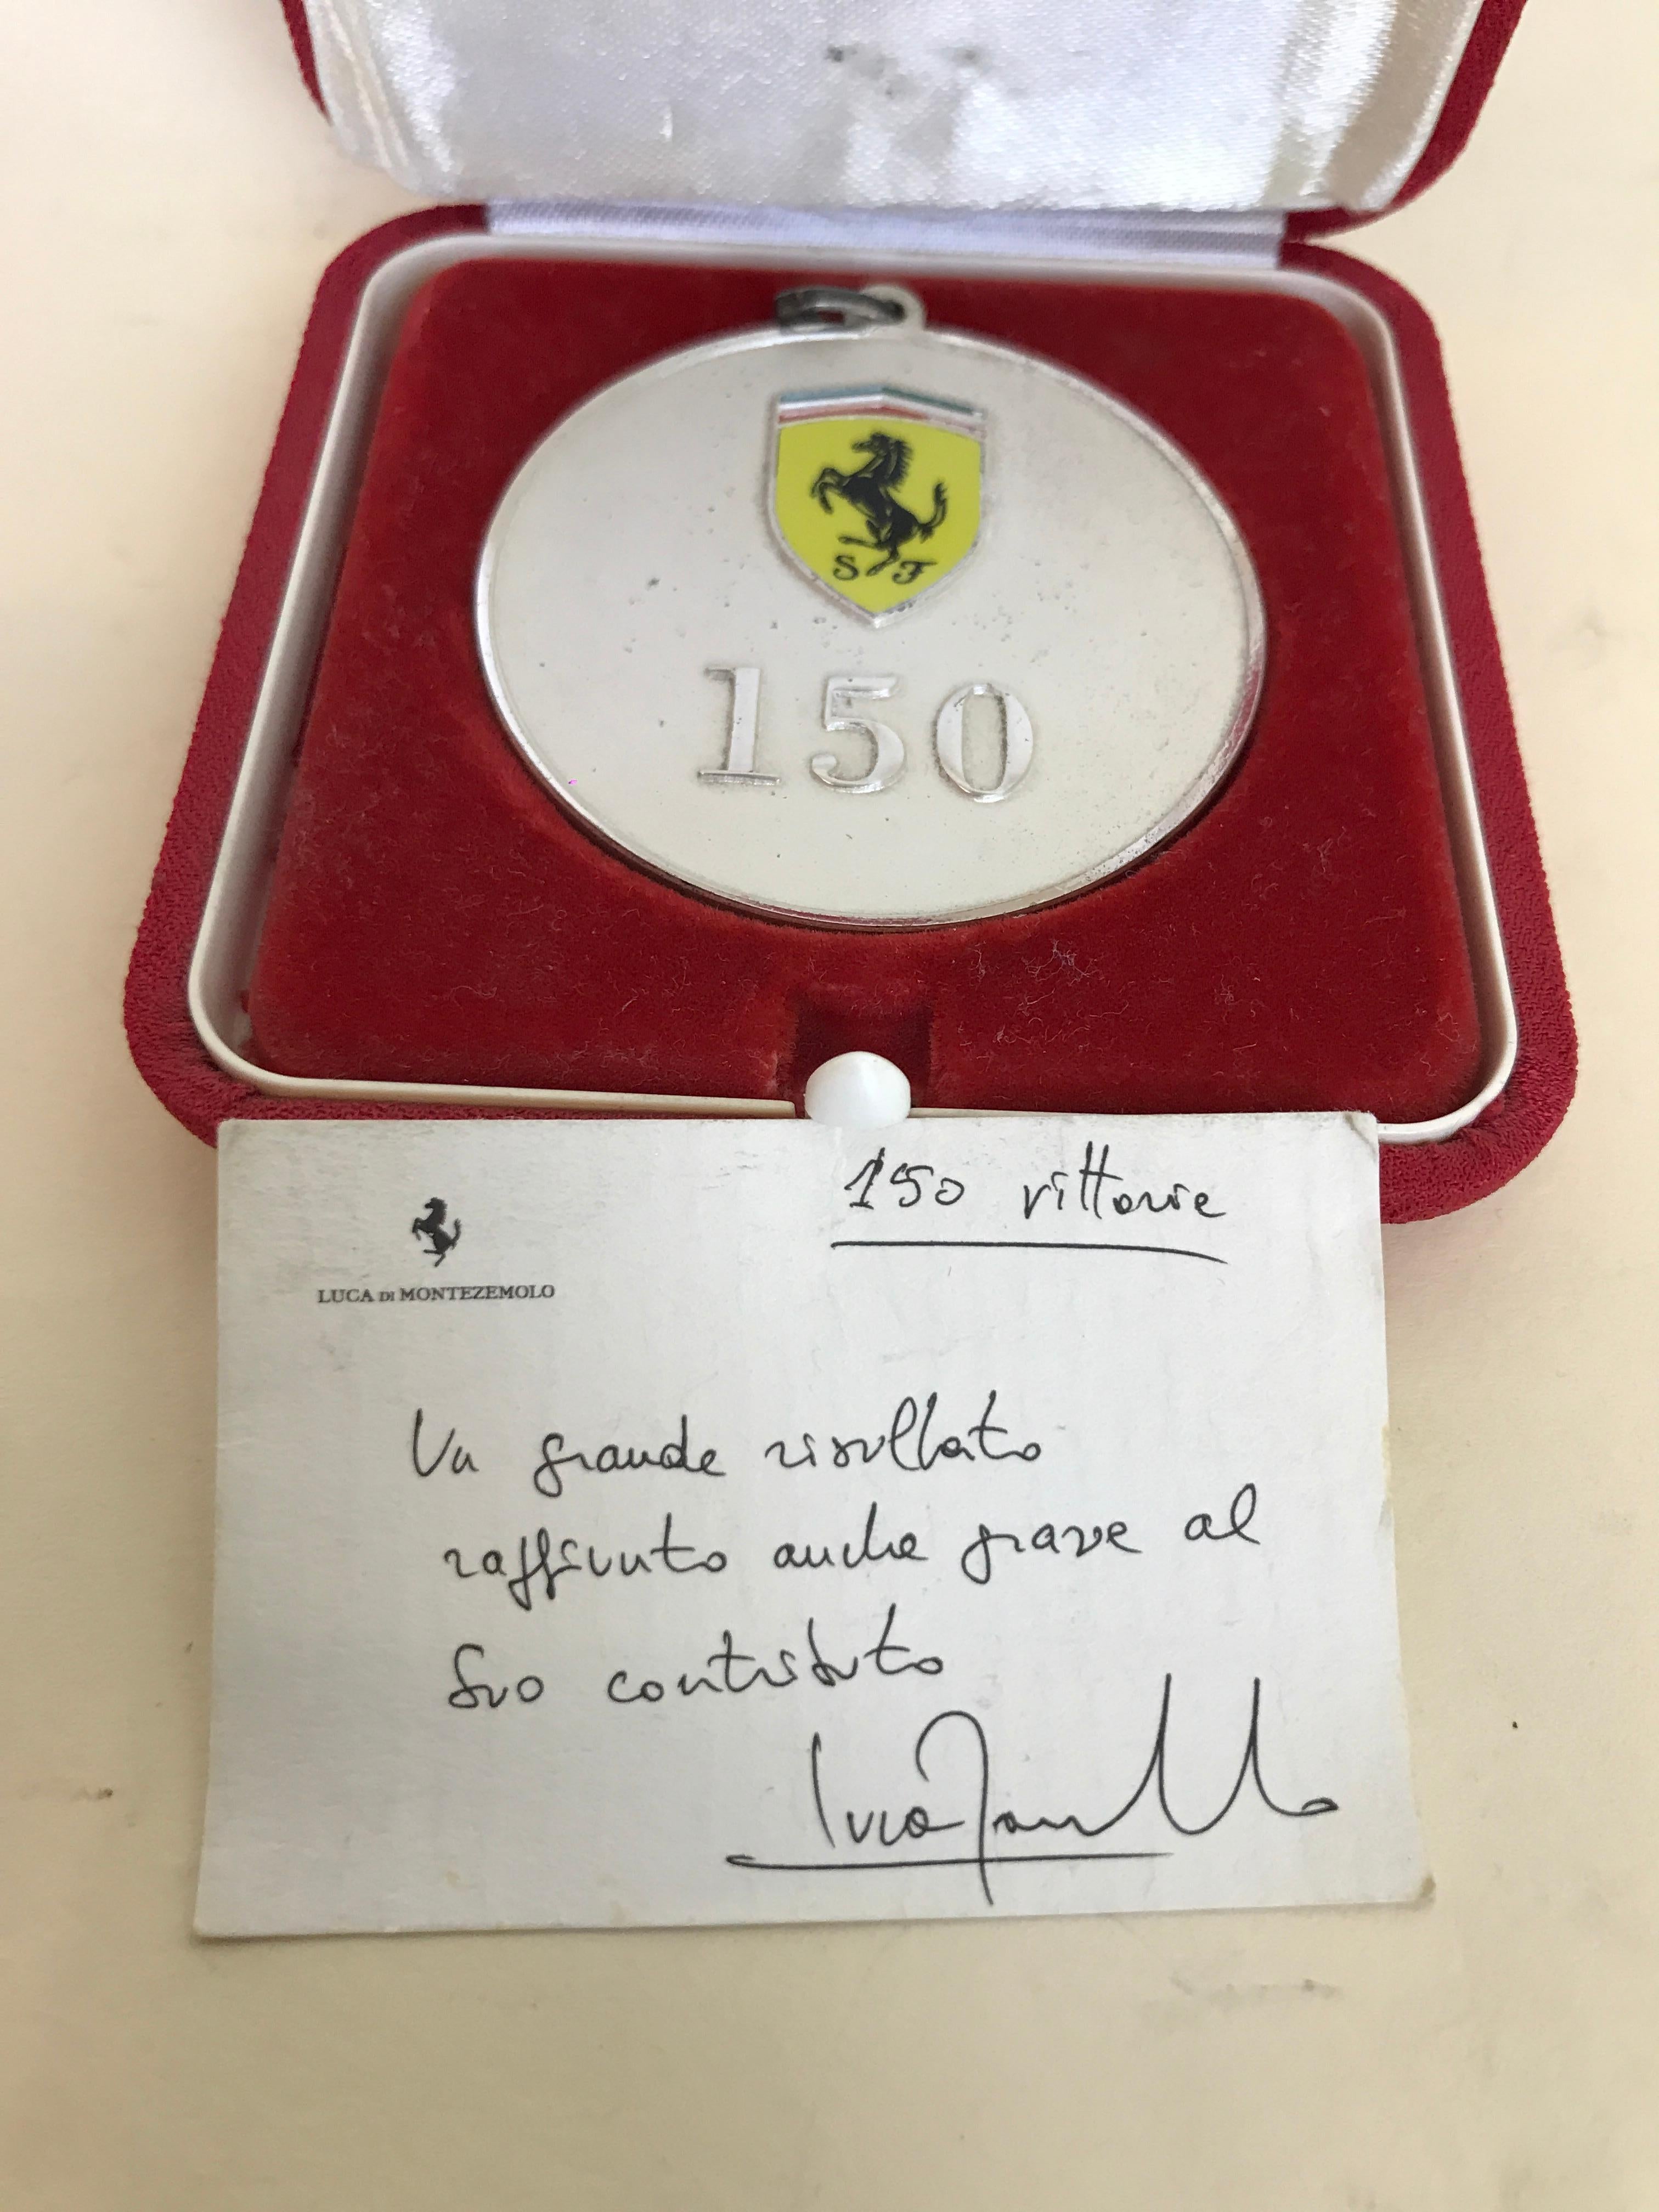 Mid-Century Modern 2002 Vintage Ferrari Commemorative Medal Celebrating the 150th Victory of GP For Sale